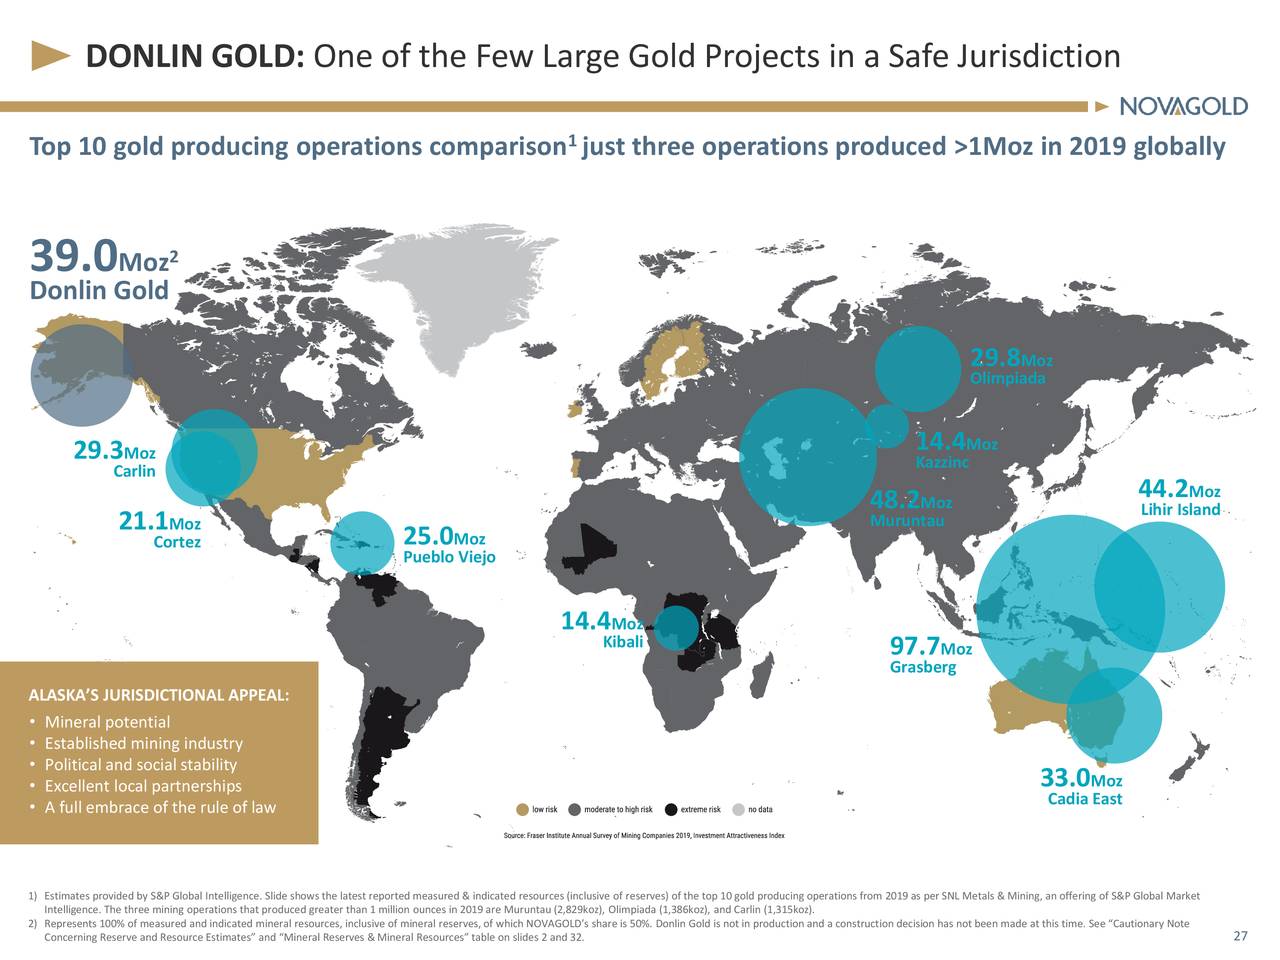 DONLIN GOLD: One of the Few Large Gold Projects in a Safe Jurisdiction